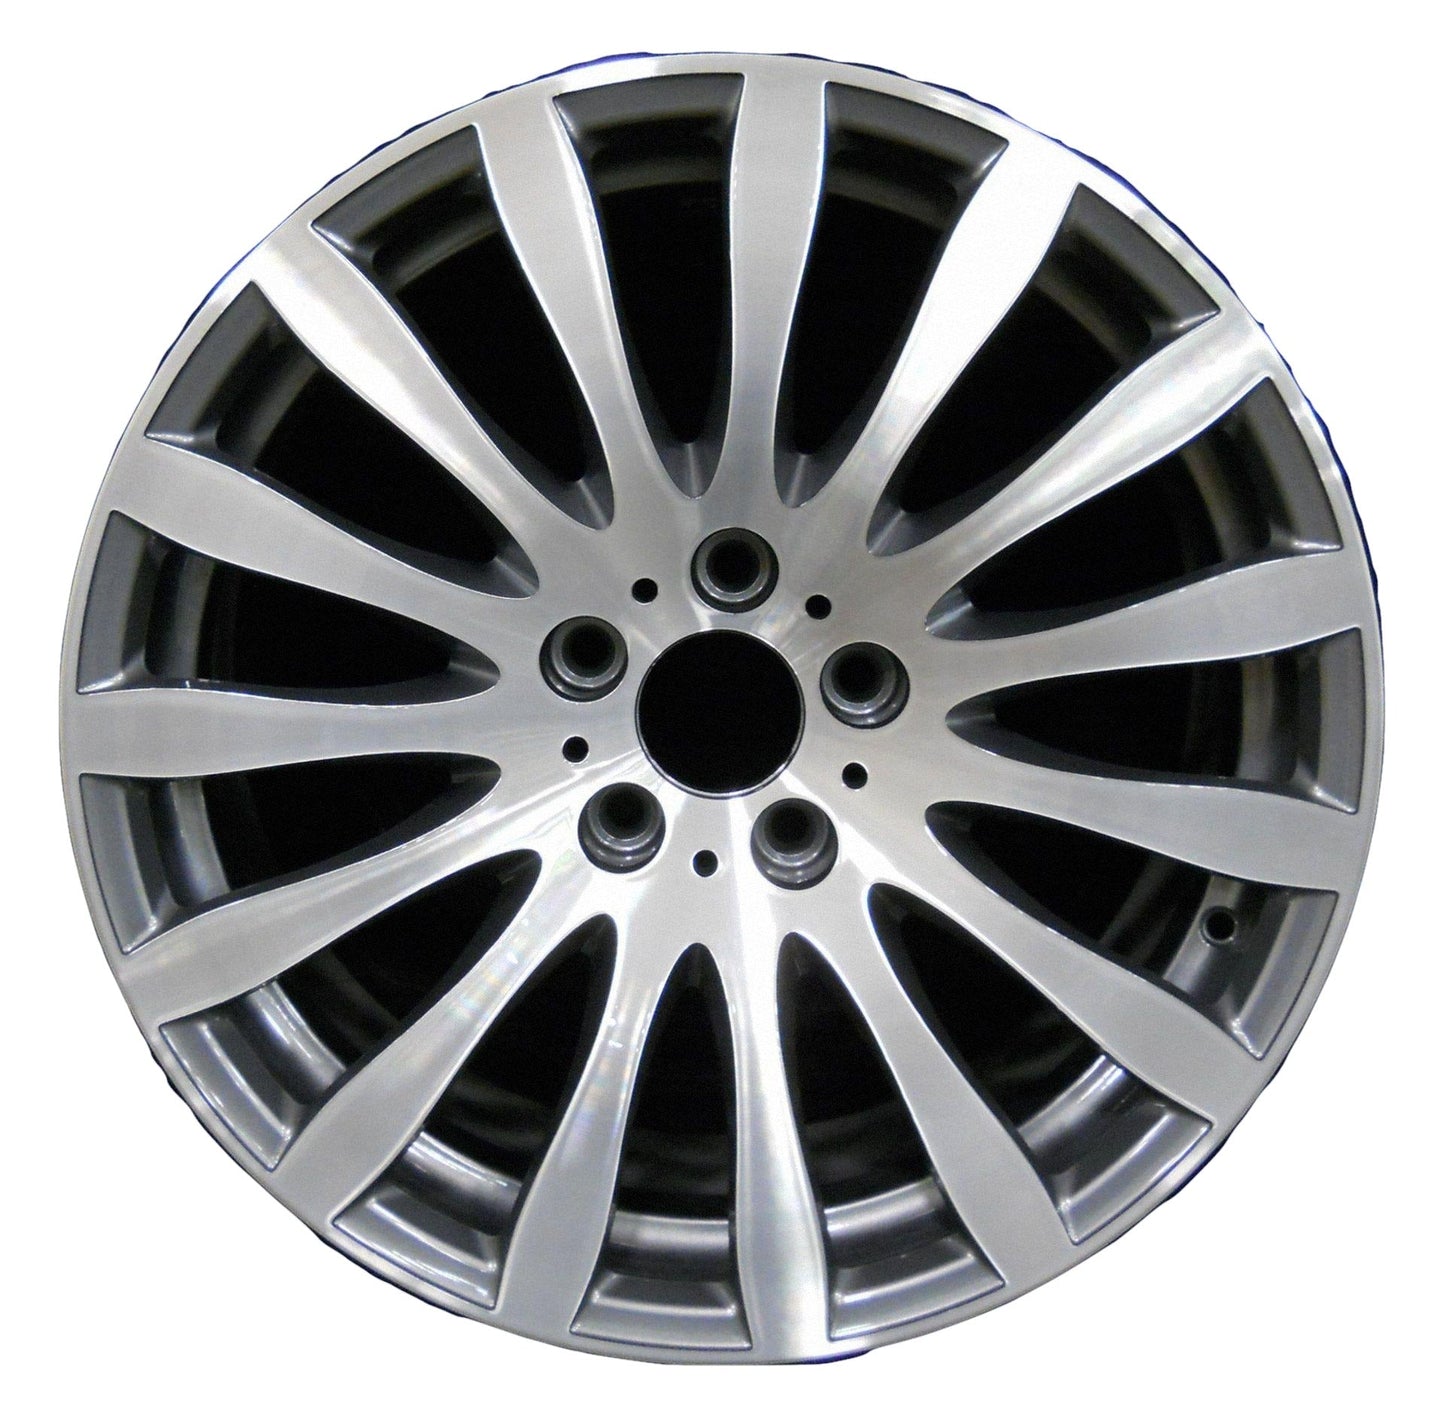 BMW 335i  2007, 2008, 2009, 2010, 2011, 2012, 2013 Factory OEM Car Wheel Size 19x8 Alloy WAO.59626FT.LC37.MABRT